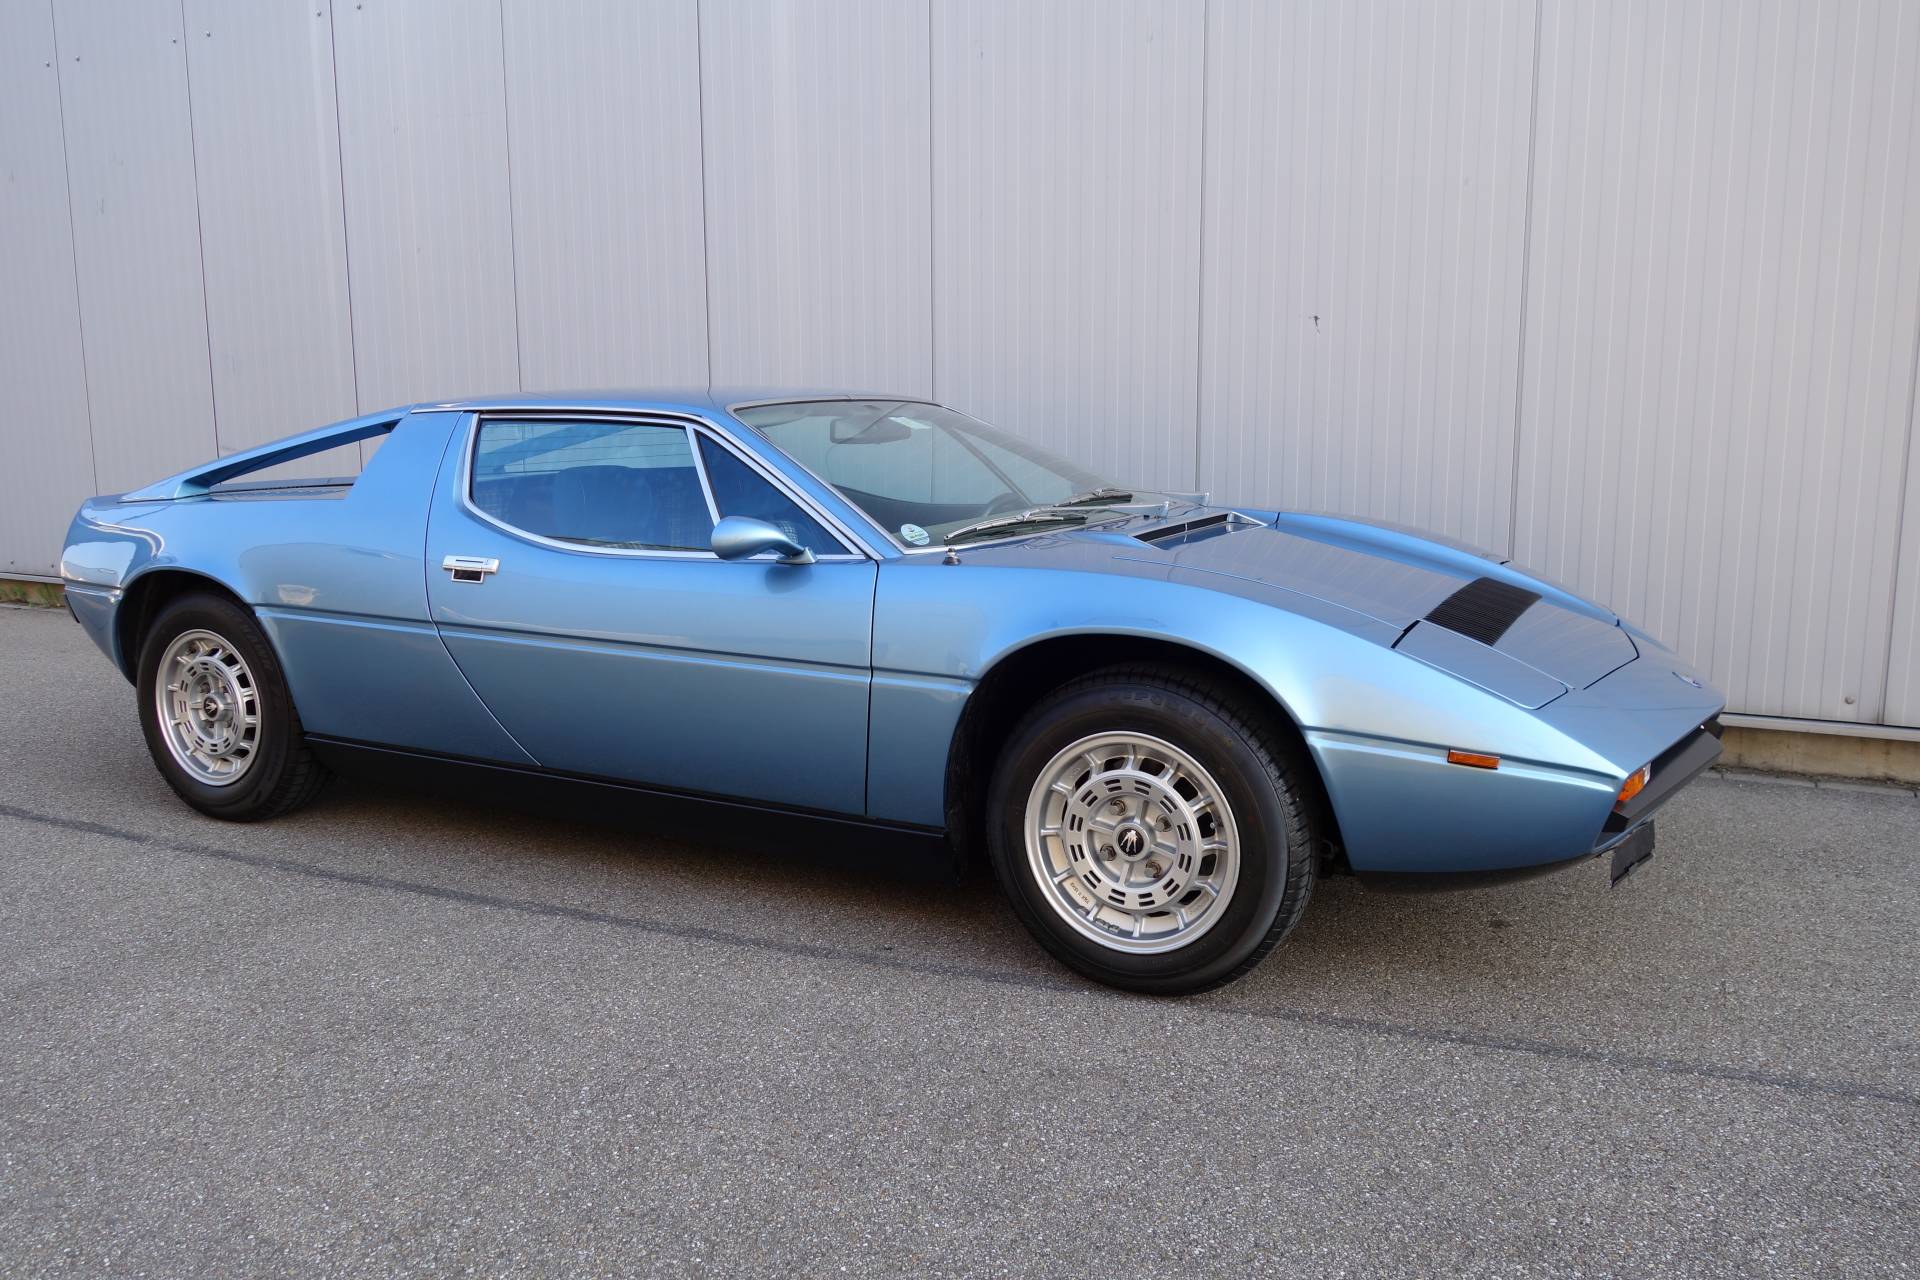 For Sale: Maserati Merak 2000 GT (1982) offered for AUD 109,908